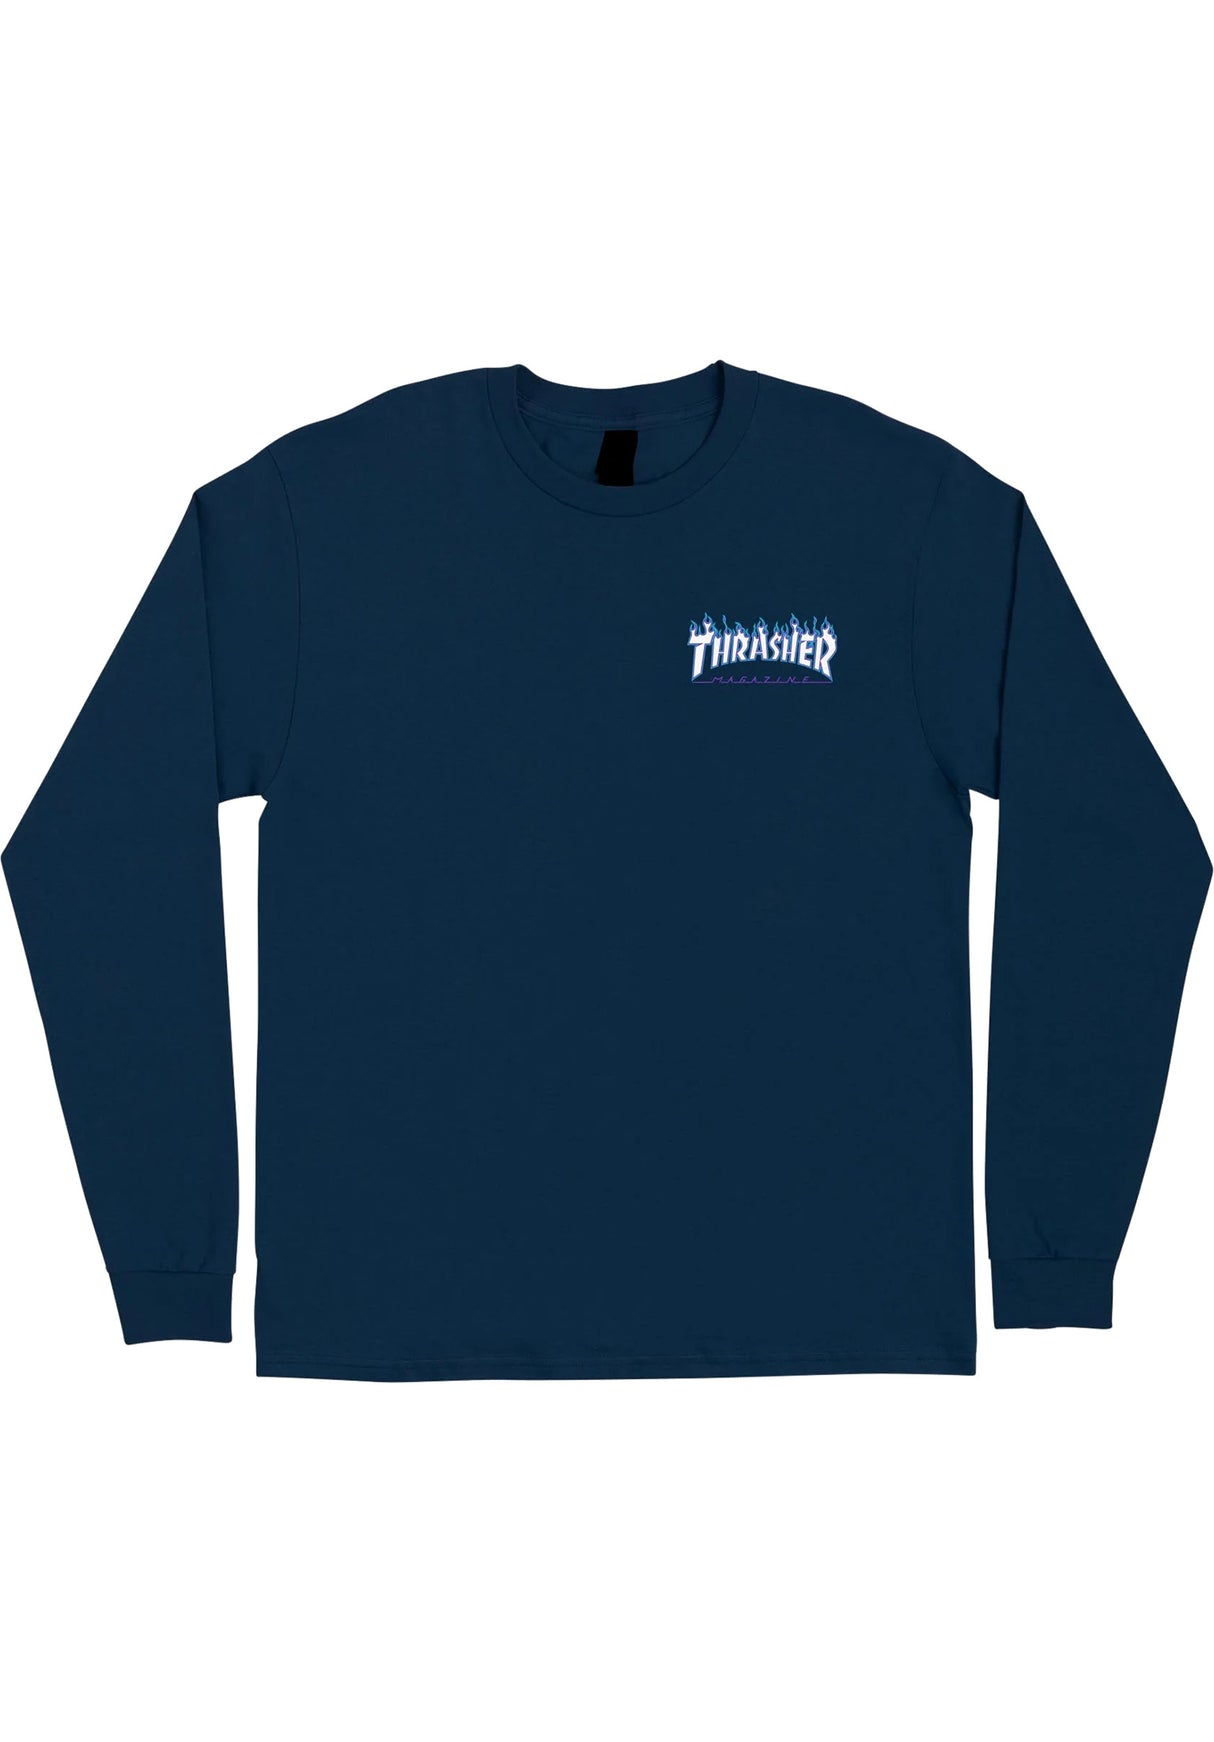 Thrasher Flame Dot L/S navy Close-Up1